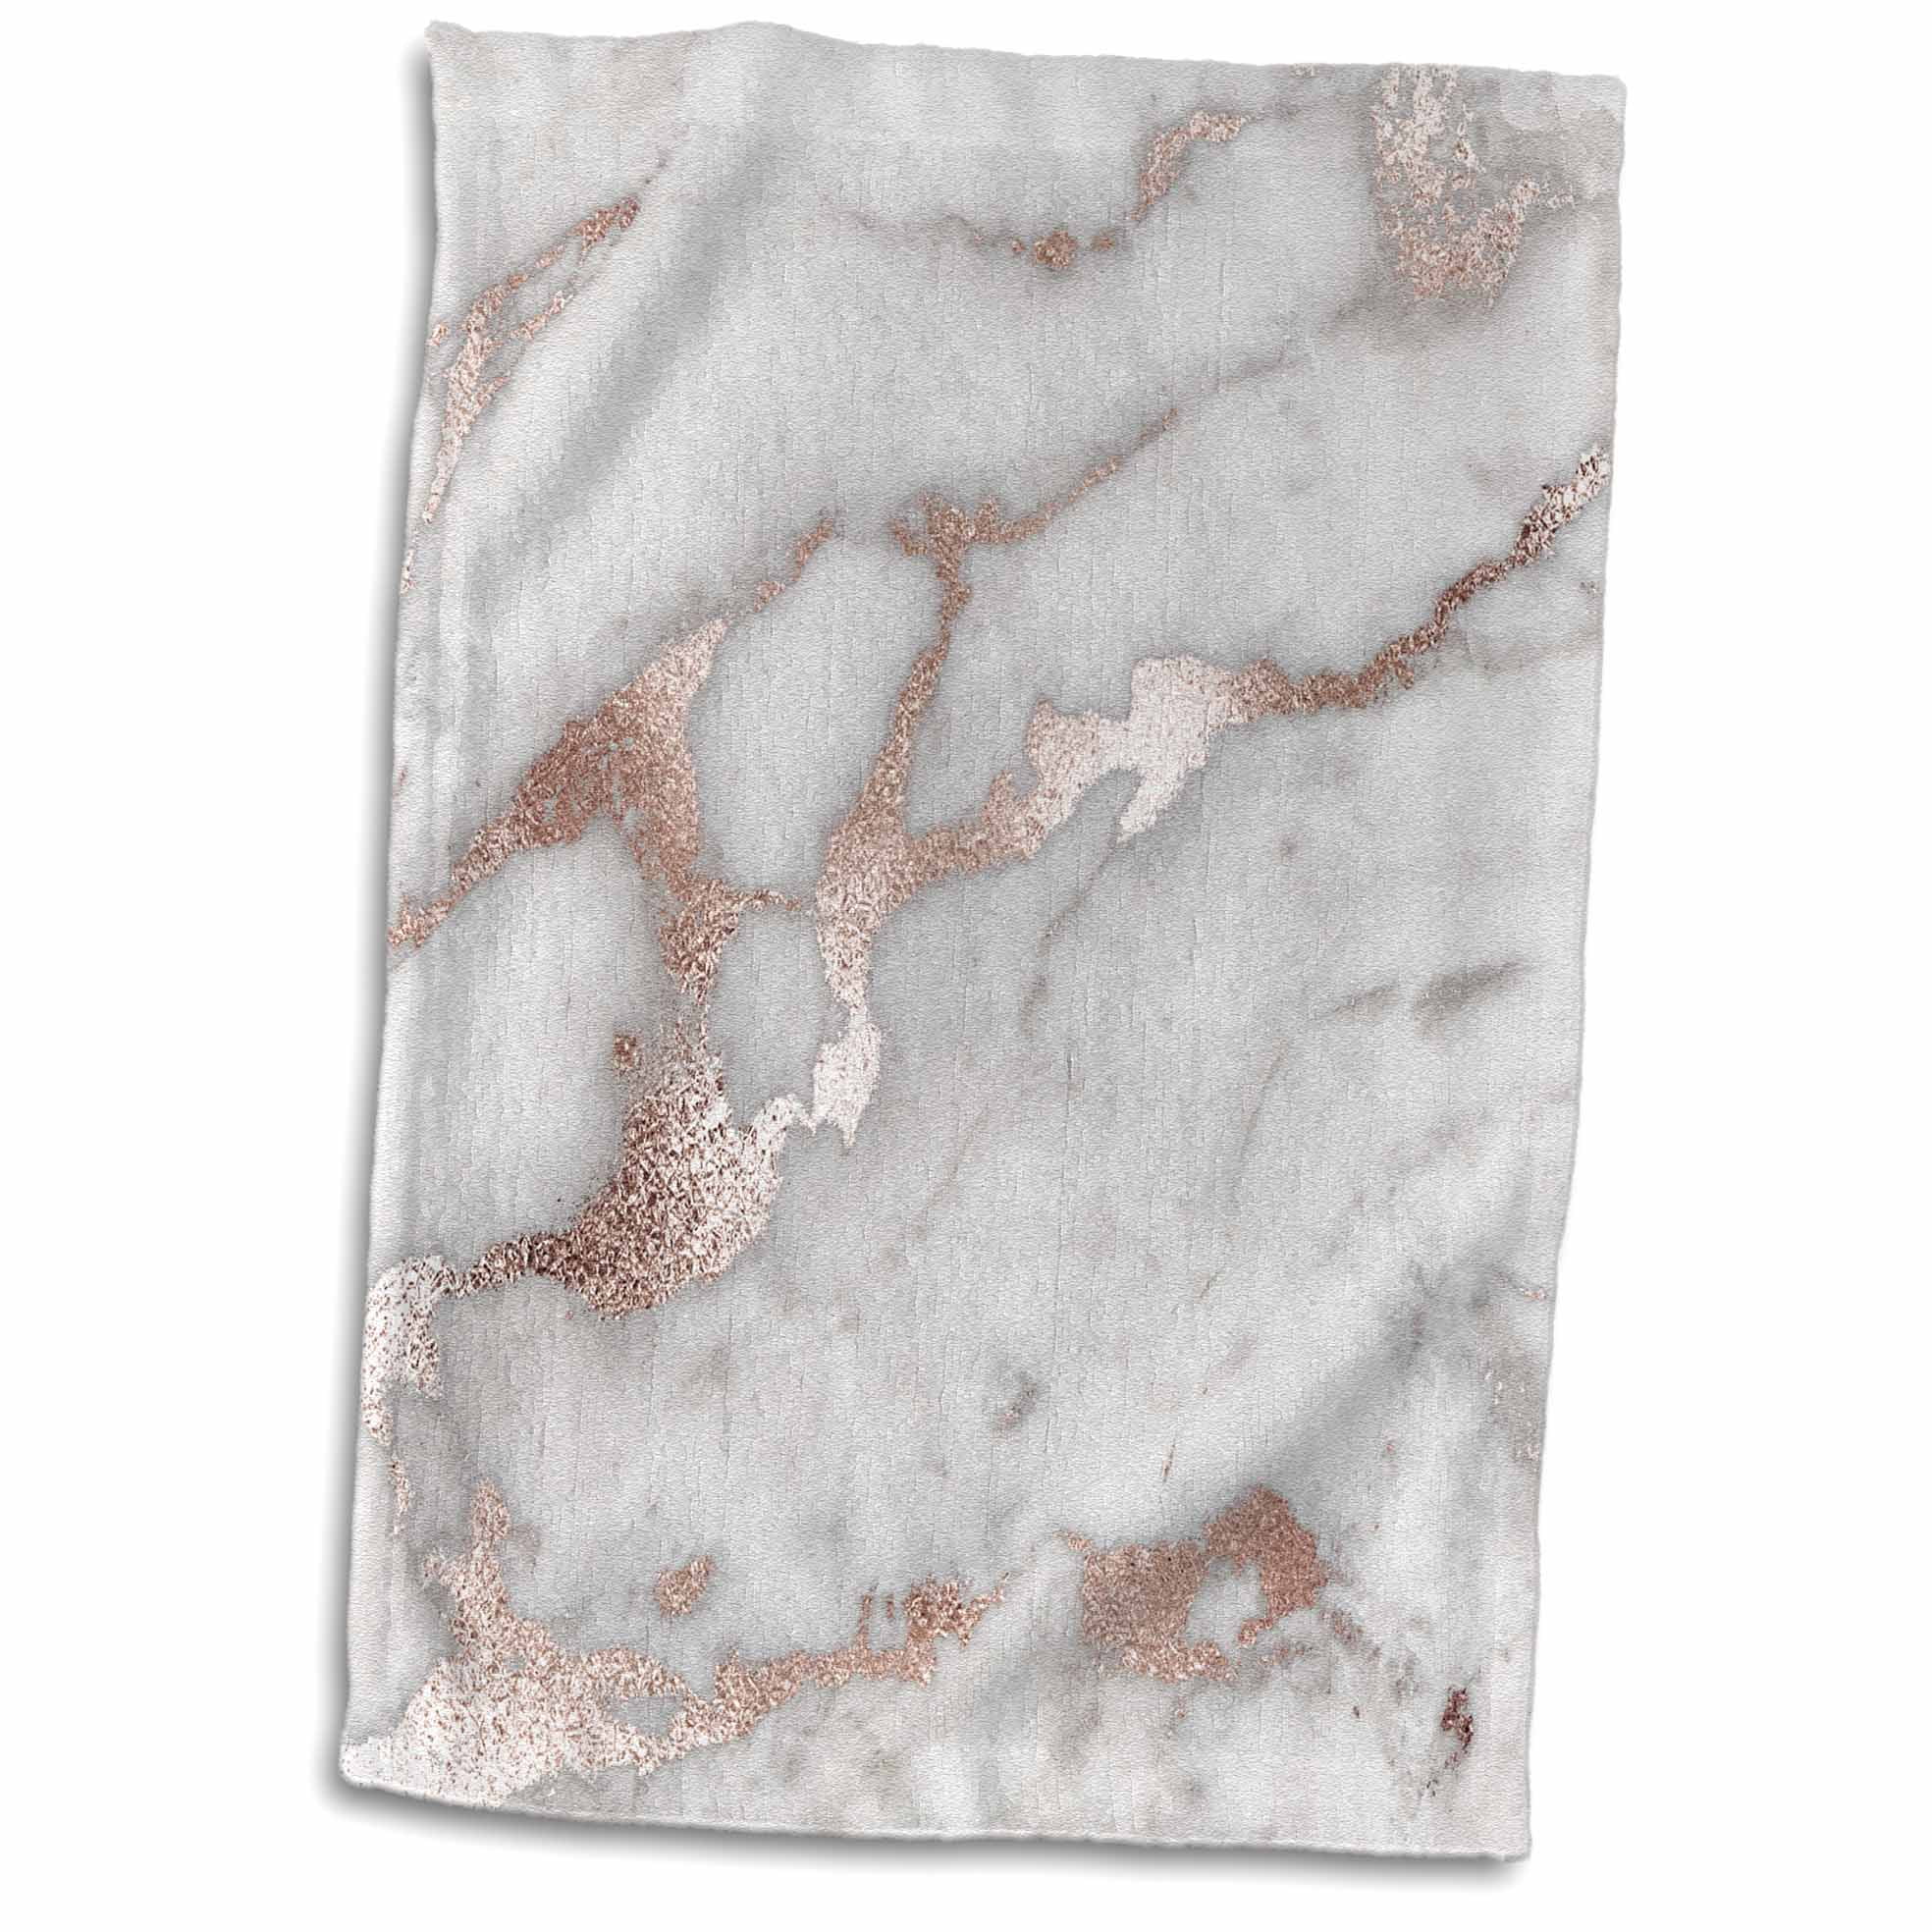 Toprint White Gold Marble Hand Towels Bathroom Towel Soft Highly Absorbent Guest Face Towel Thin Multipurpose Towels for Kitchen Gym Hotel Sports Yoga Bath Home Decor 16x30 Inch 